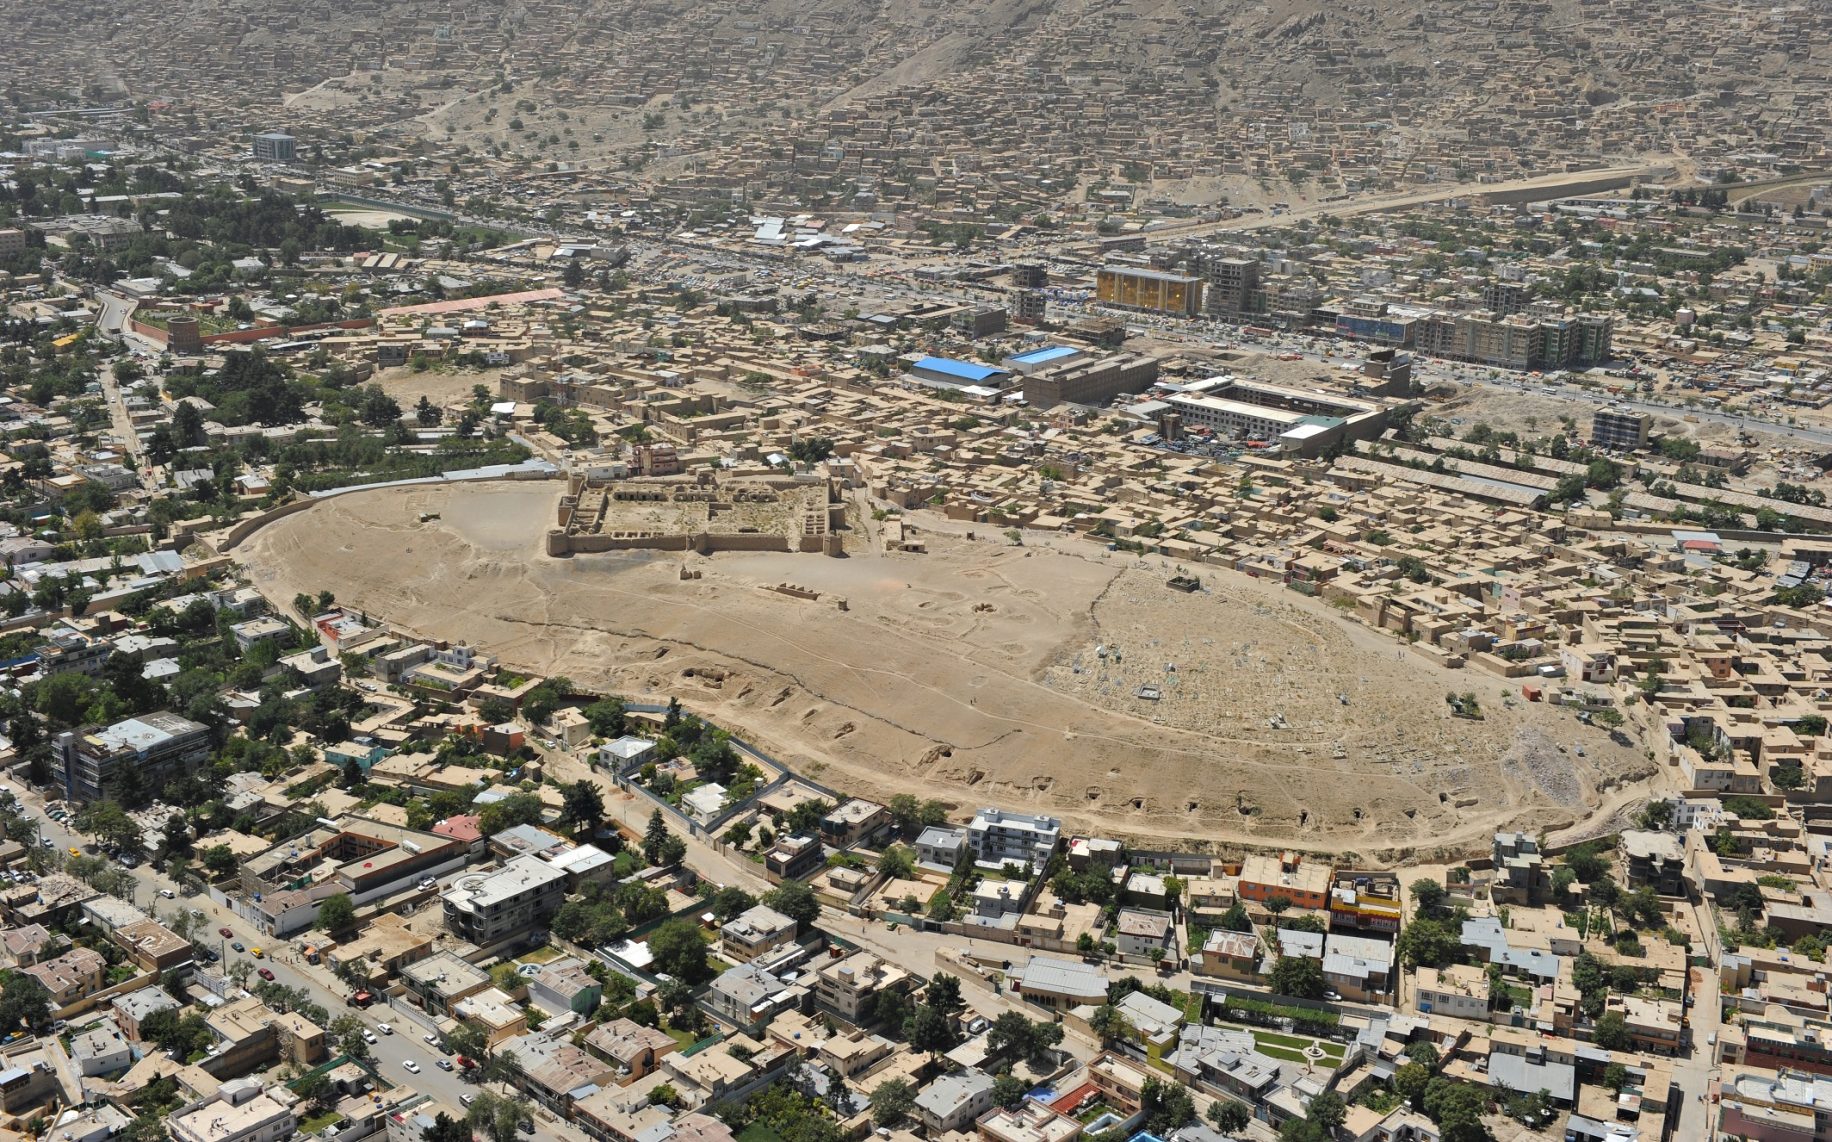 https://americanmilitarynews.com/wp-content/uploads/Section_of_Kabul_in_2011.jpg